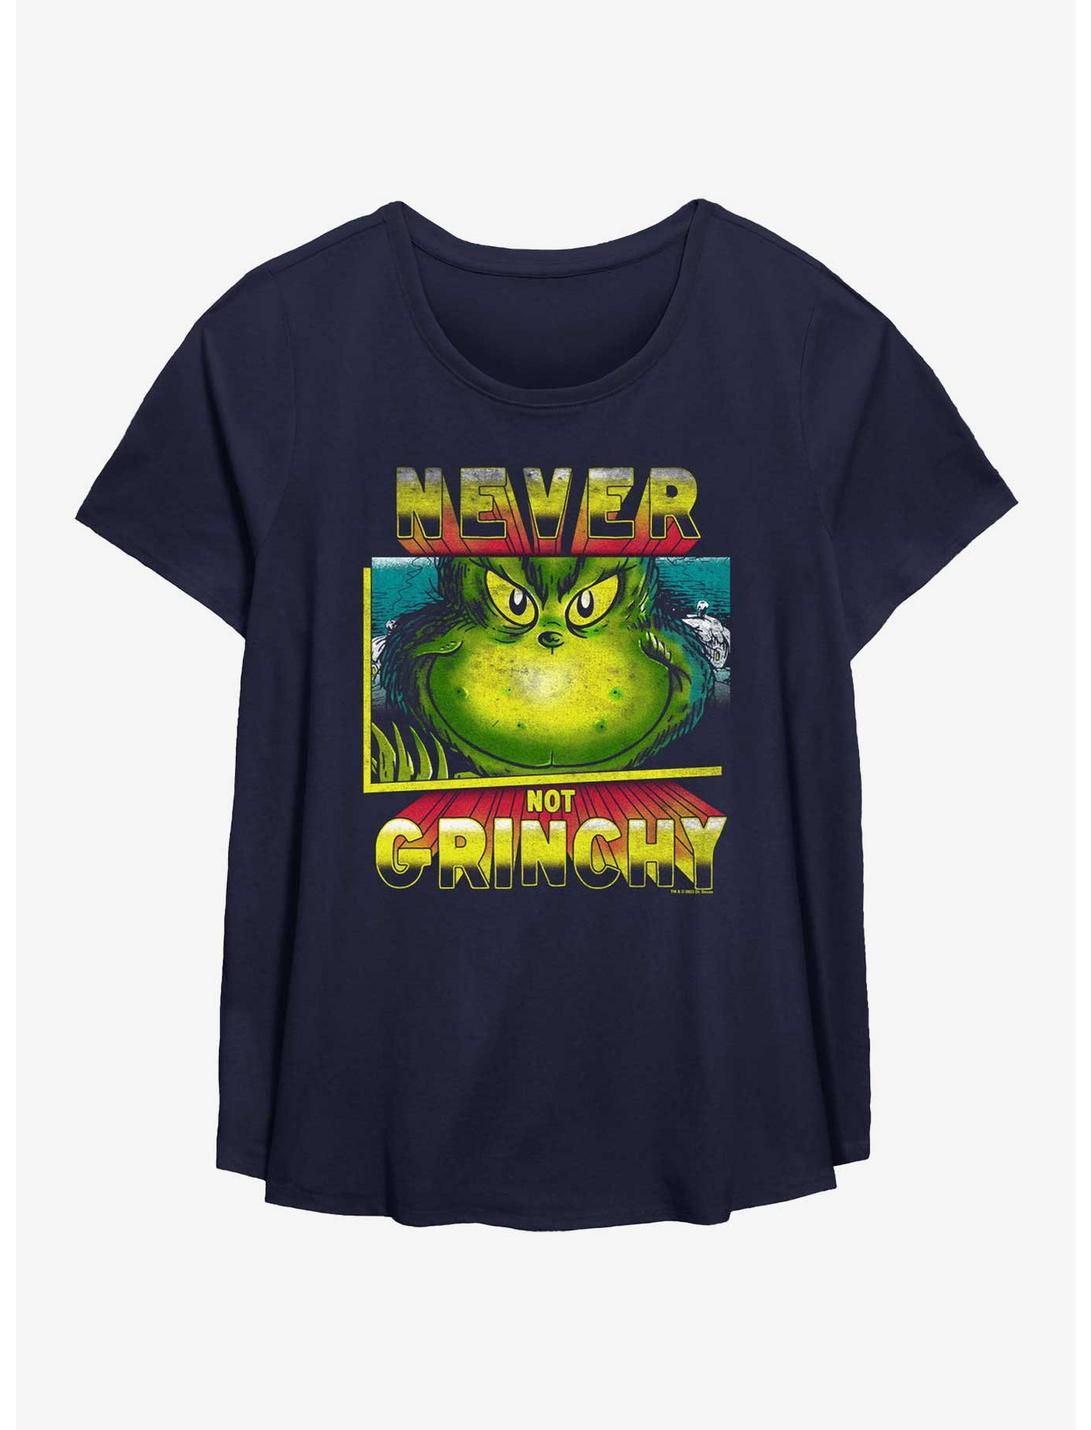 Dr. Seuss How The Grinch Stole Christmas Never Not Grinchy Girls T-Shirt Plus Size, NAVY, hi-res